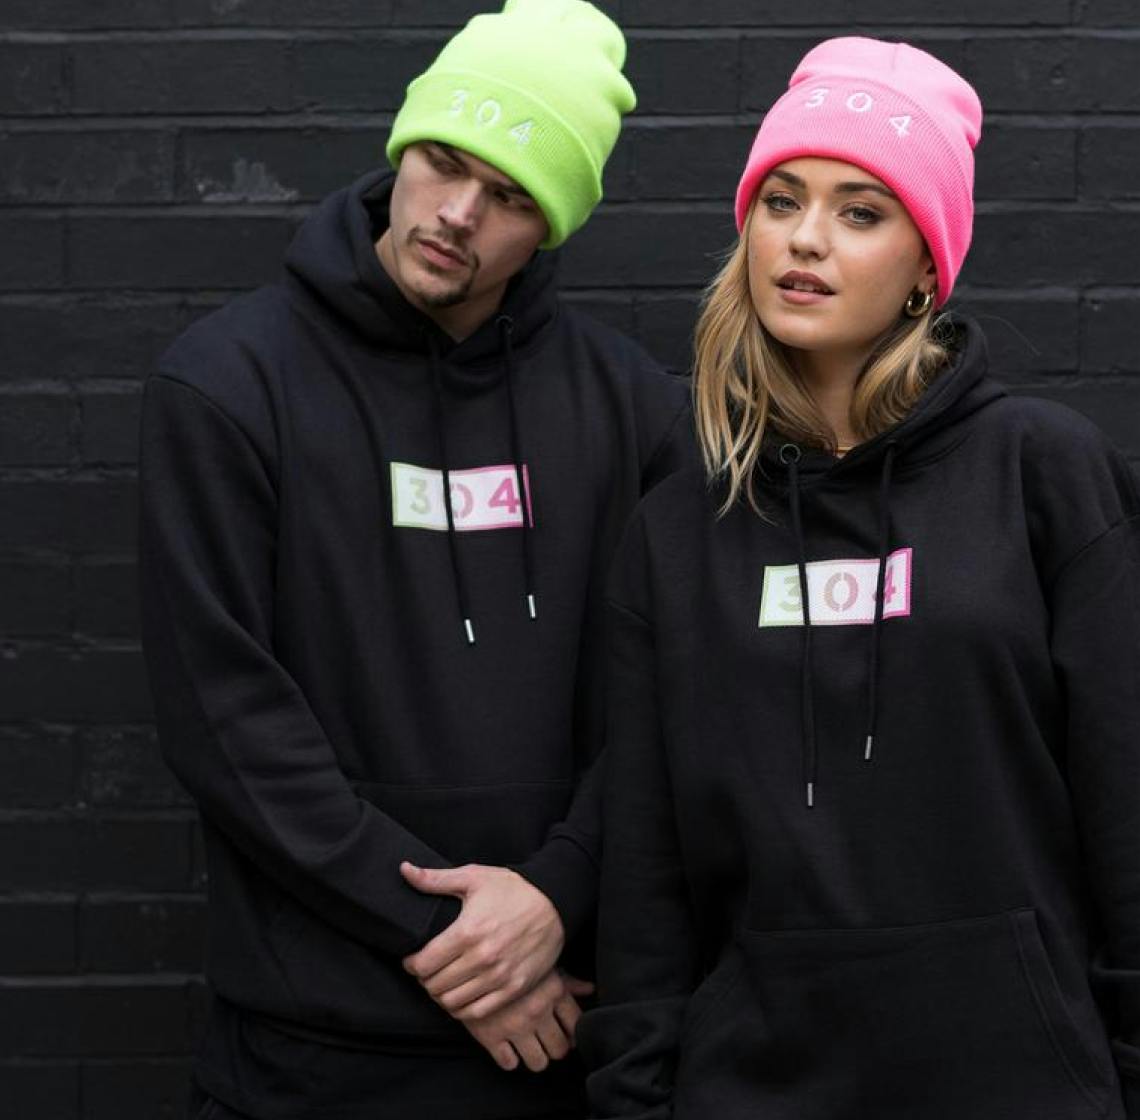 Two models wearing blac 304 branded hoodies and green and pink beanies